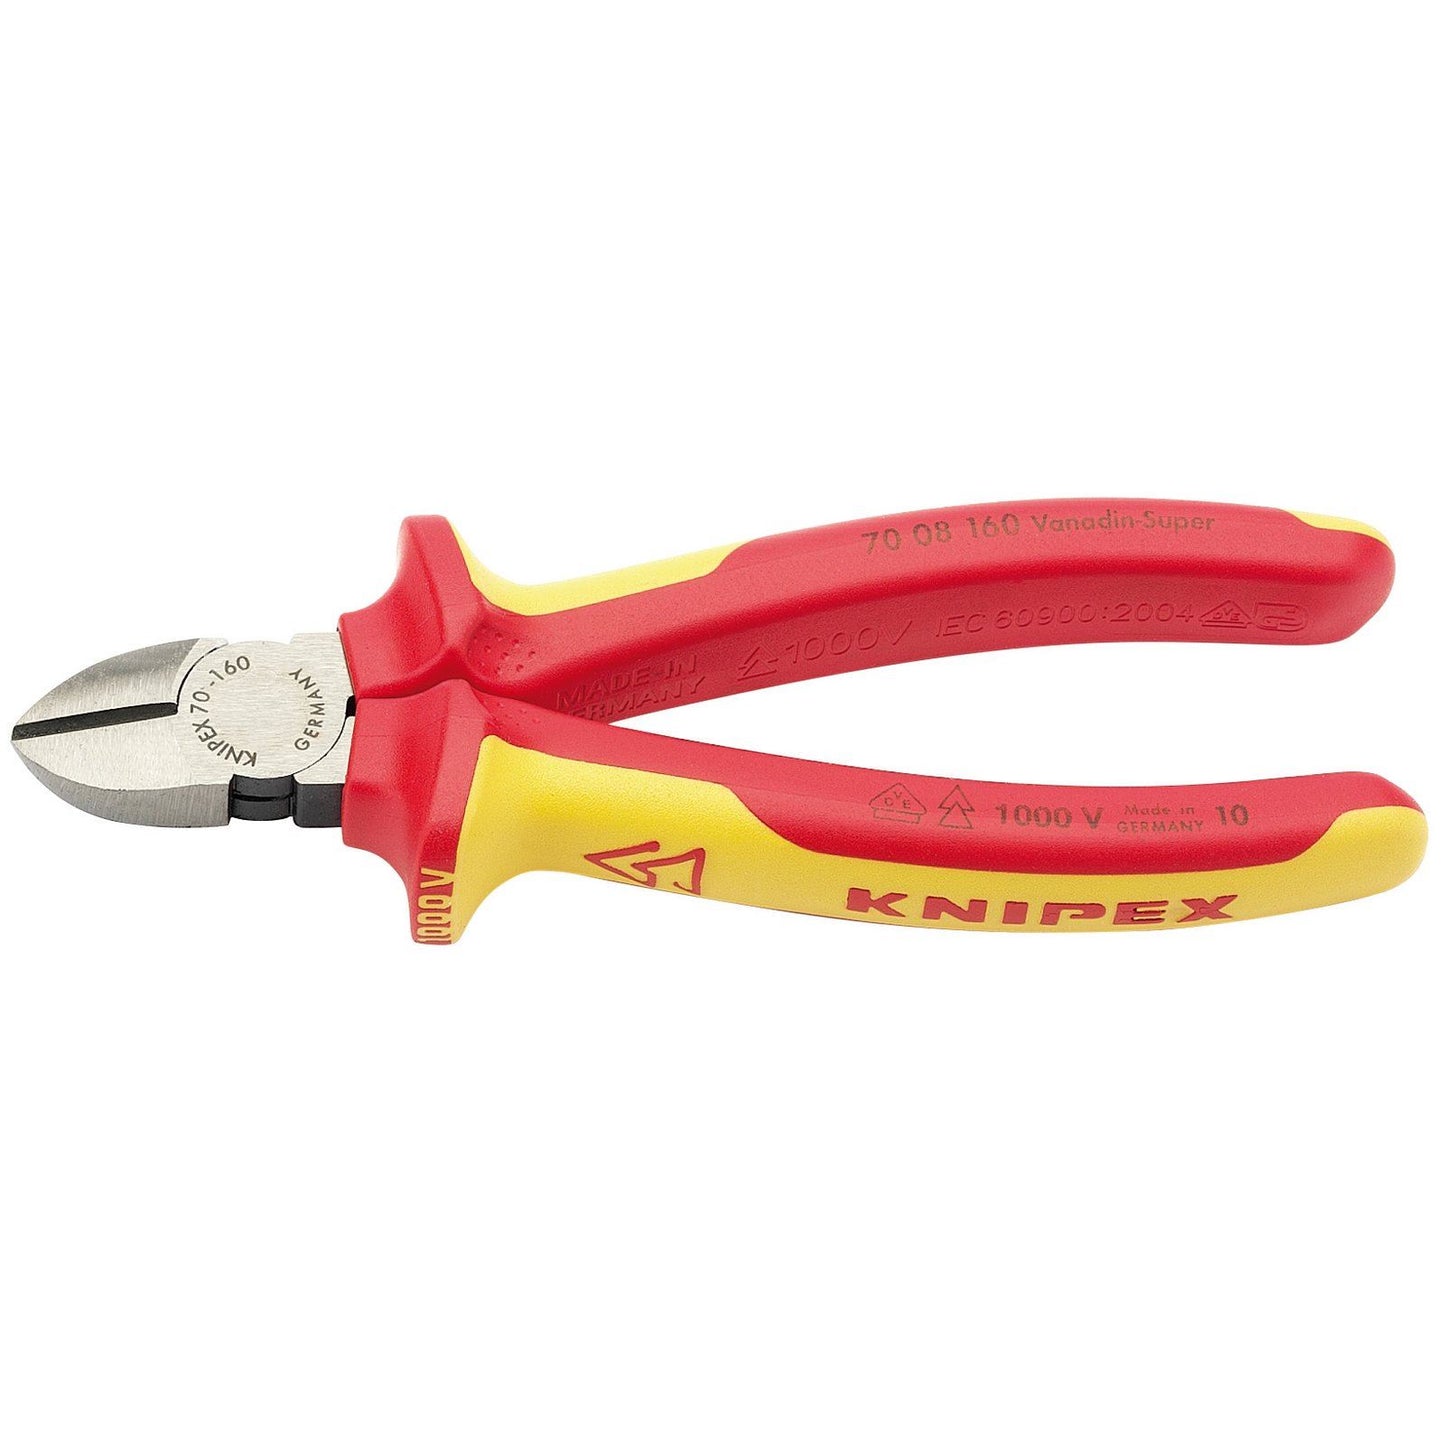 Knipex 70 08 160 VDE Fully Insulated Diagonal Side Cutters 160mm - Draper 31926